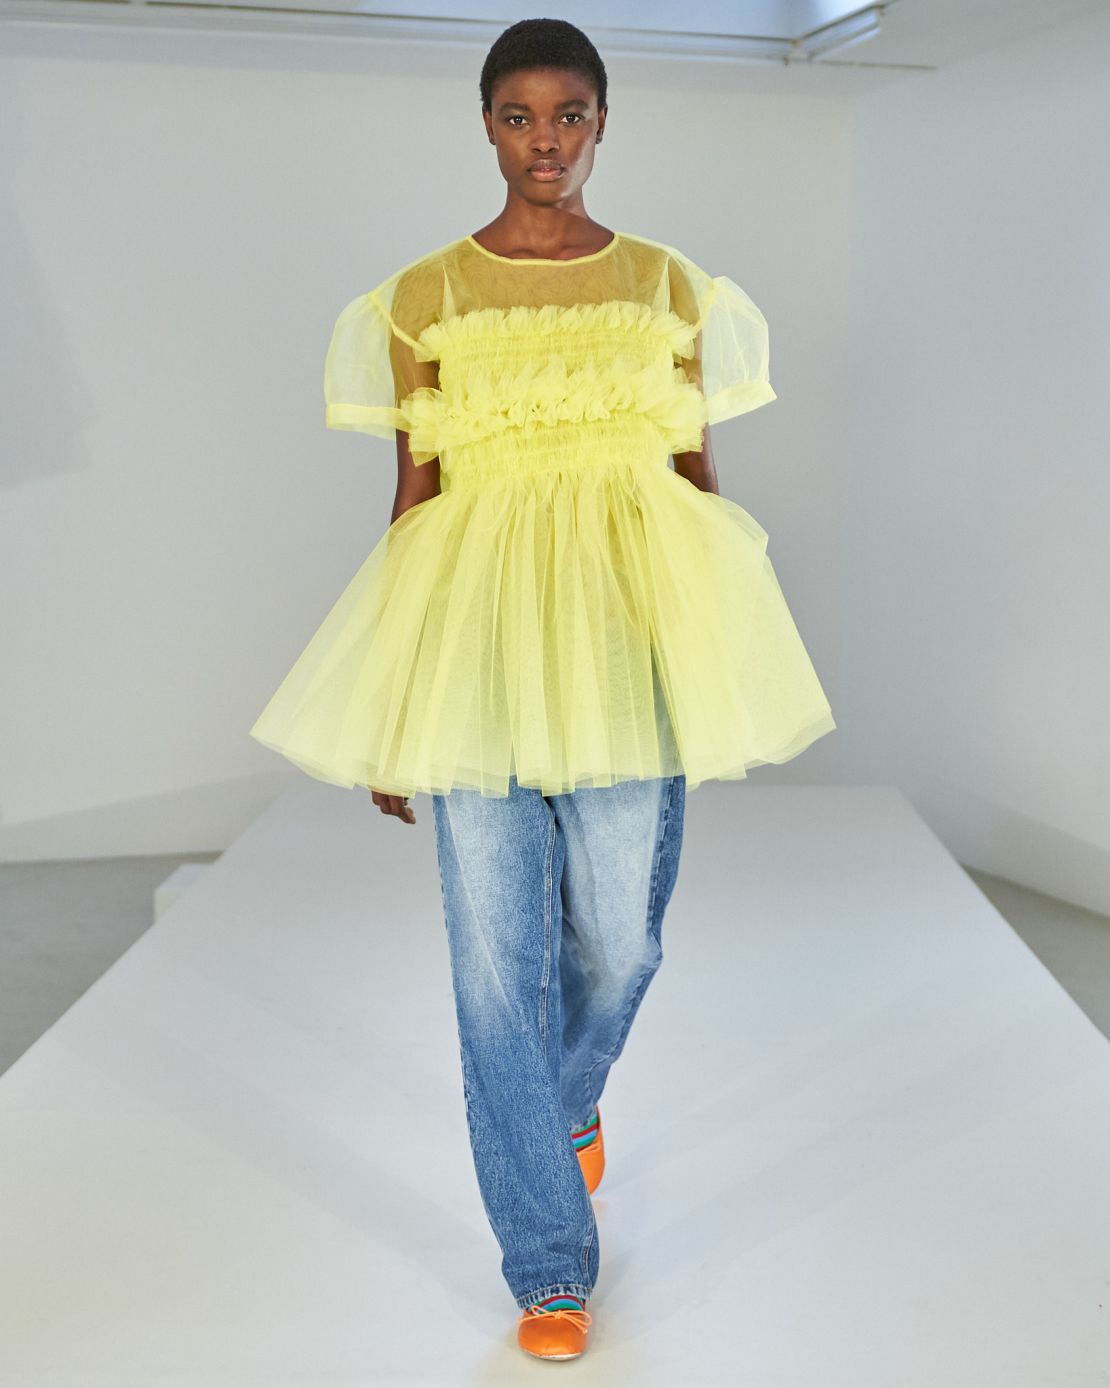 Jeans and dresses were a theme in Molly Goddard's London Fashion Week Spring-Summer 2022 presentation.